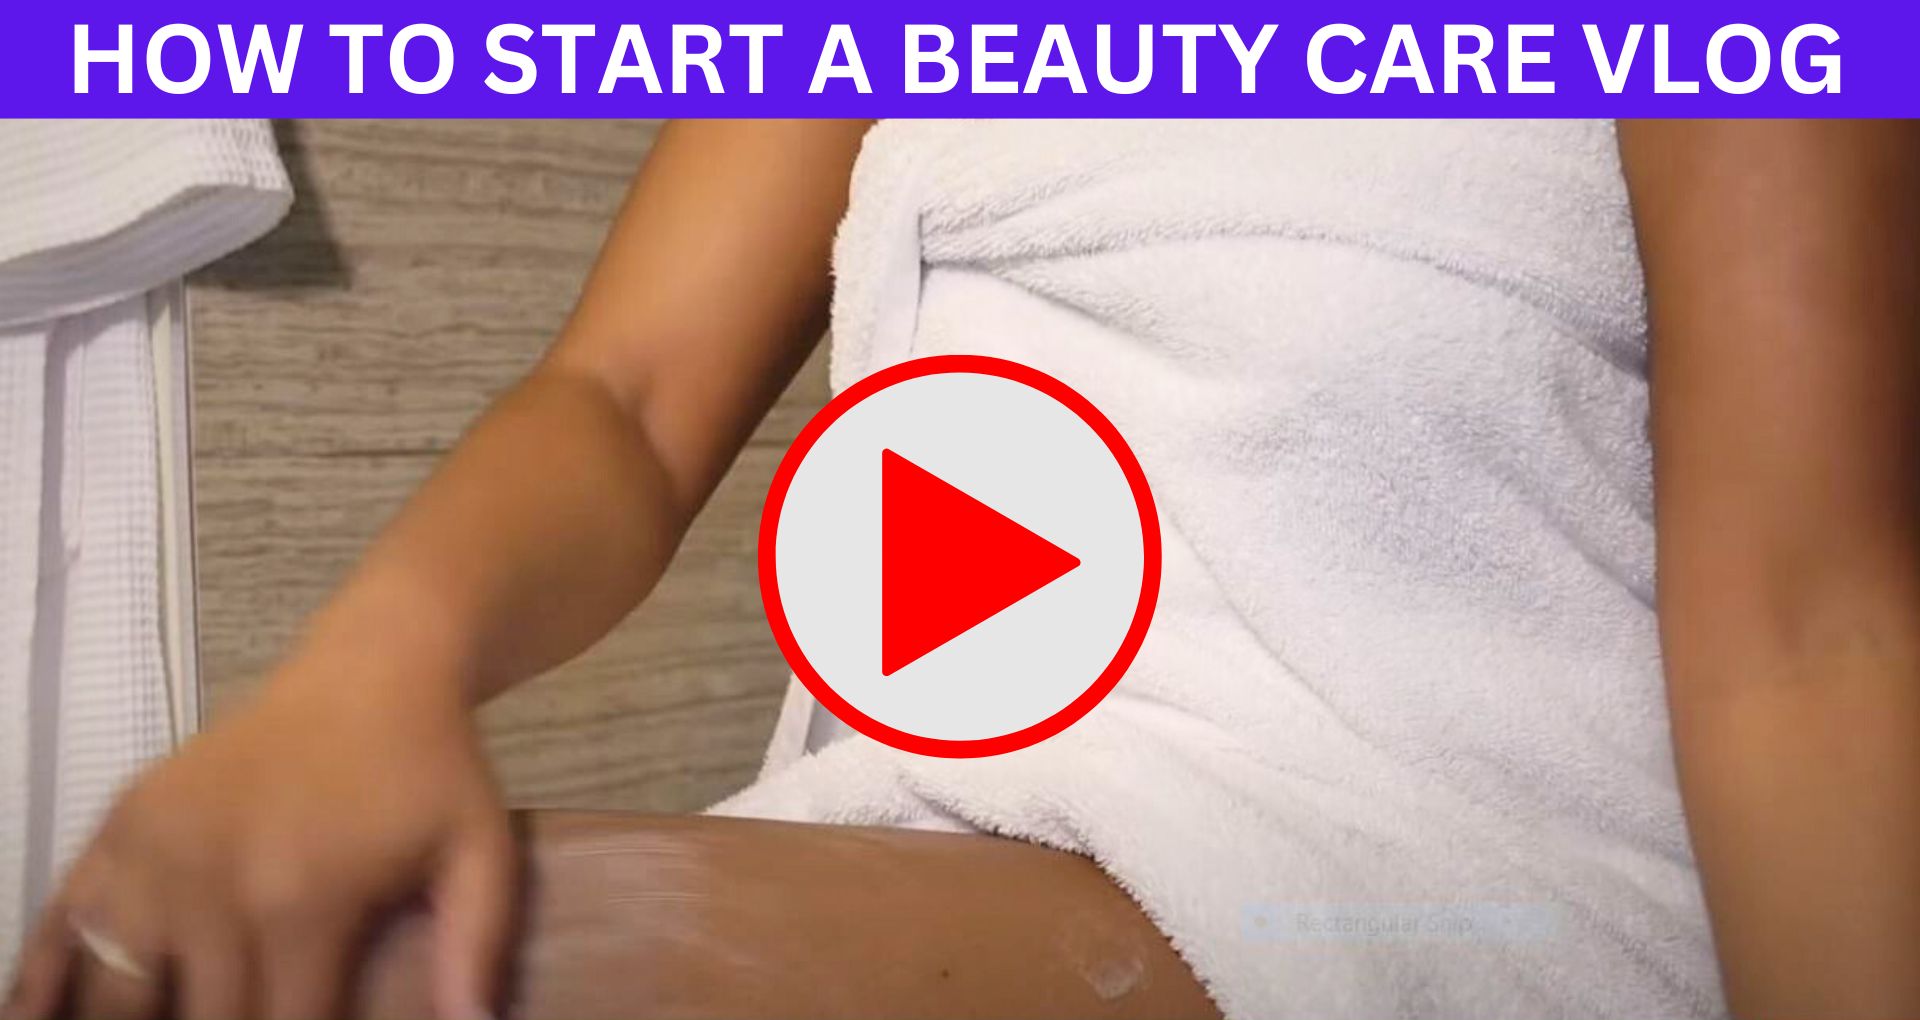 HOW TO START A BEAUTY CARE VLOG